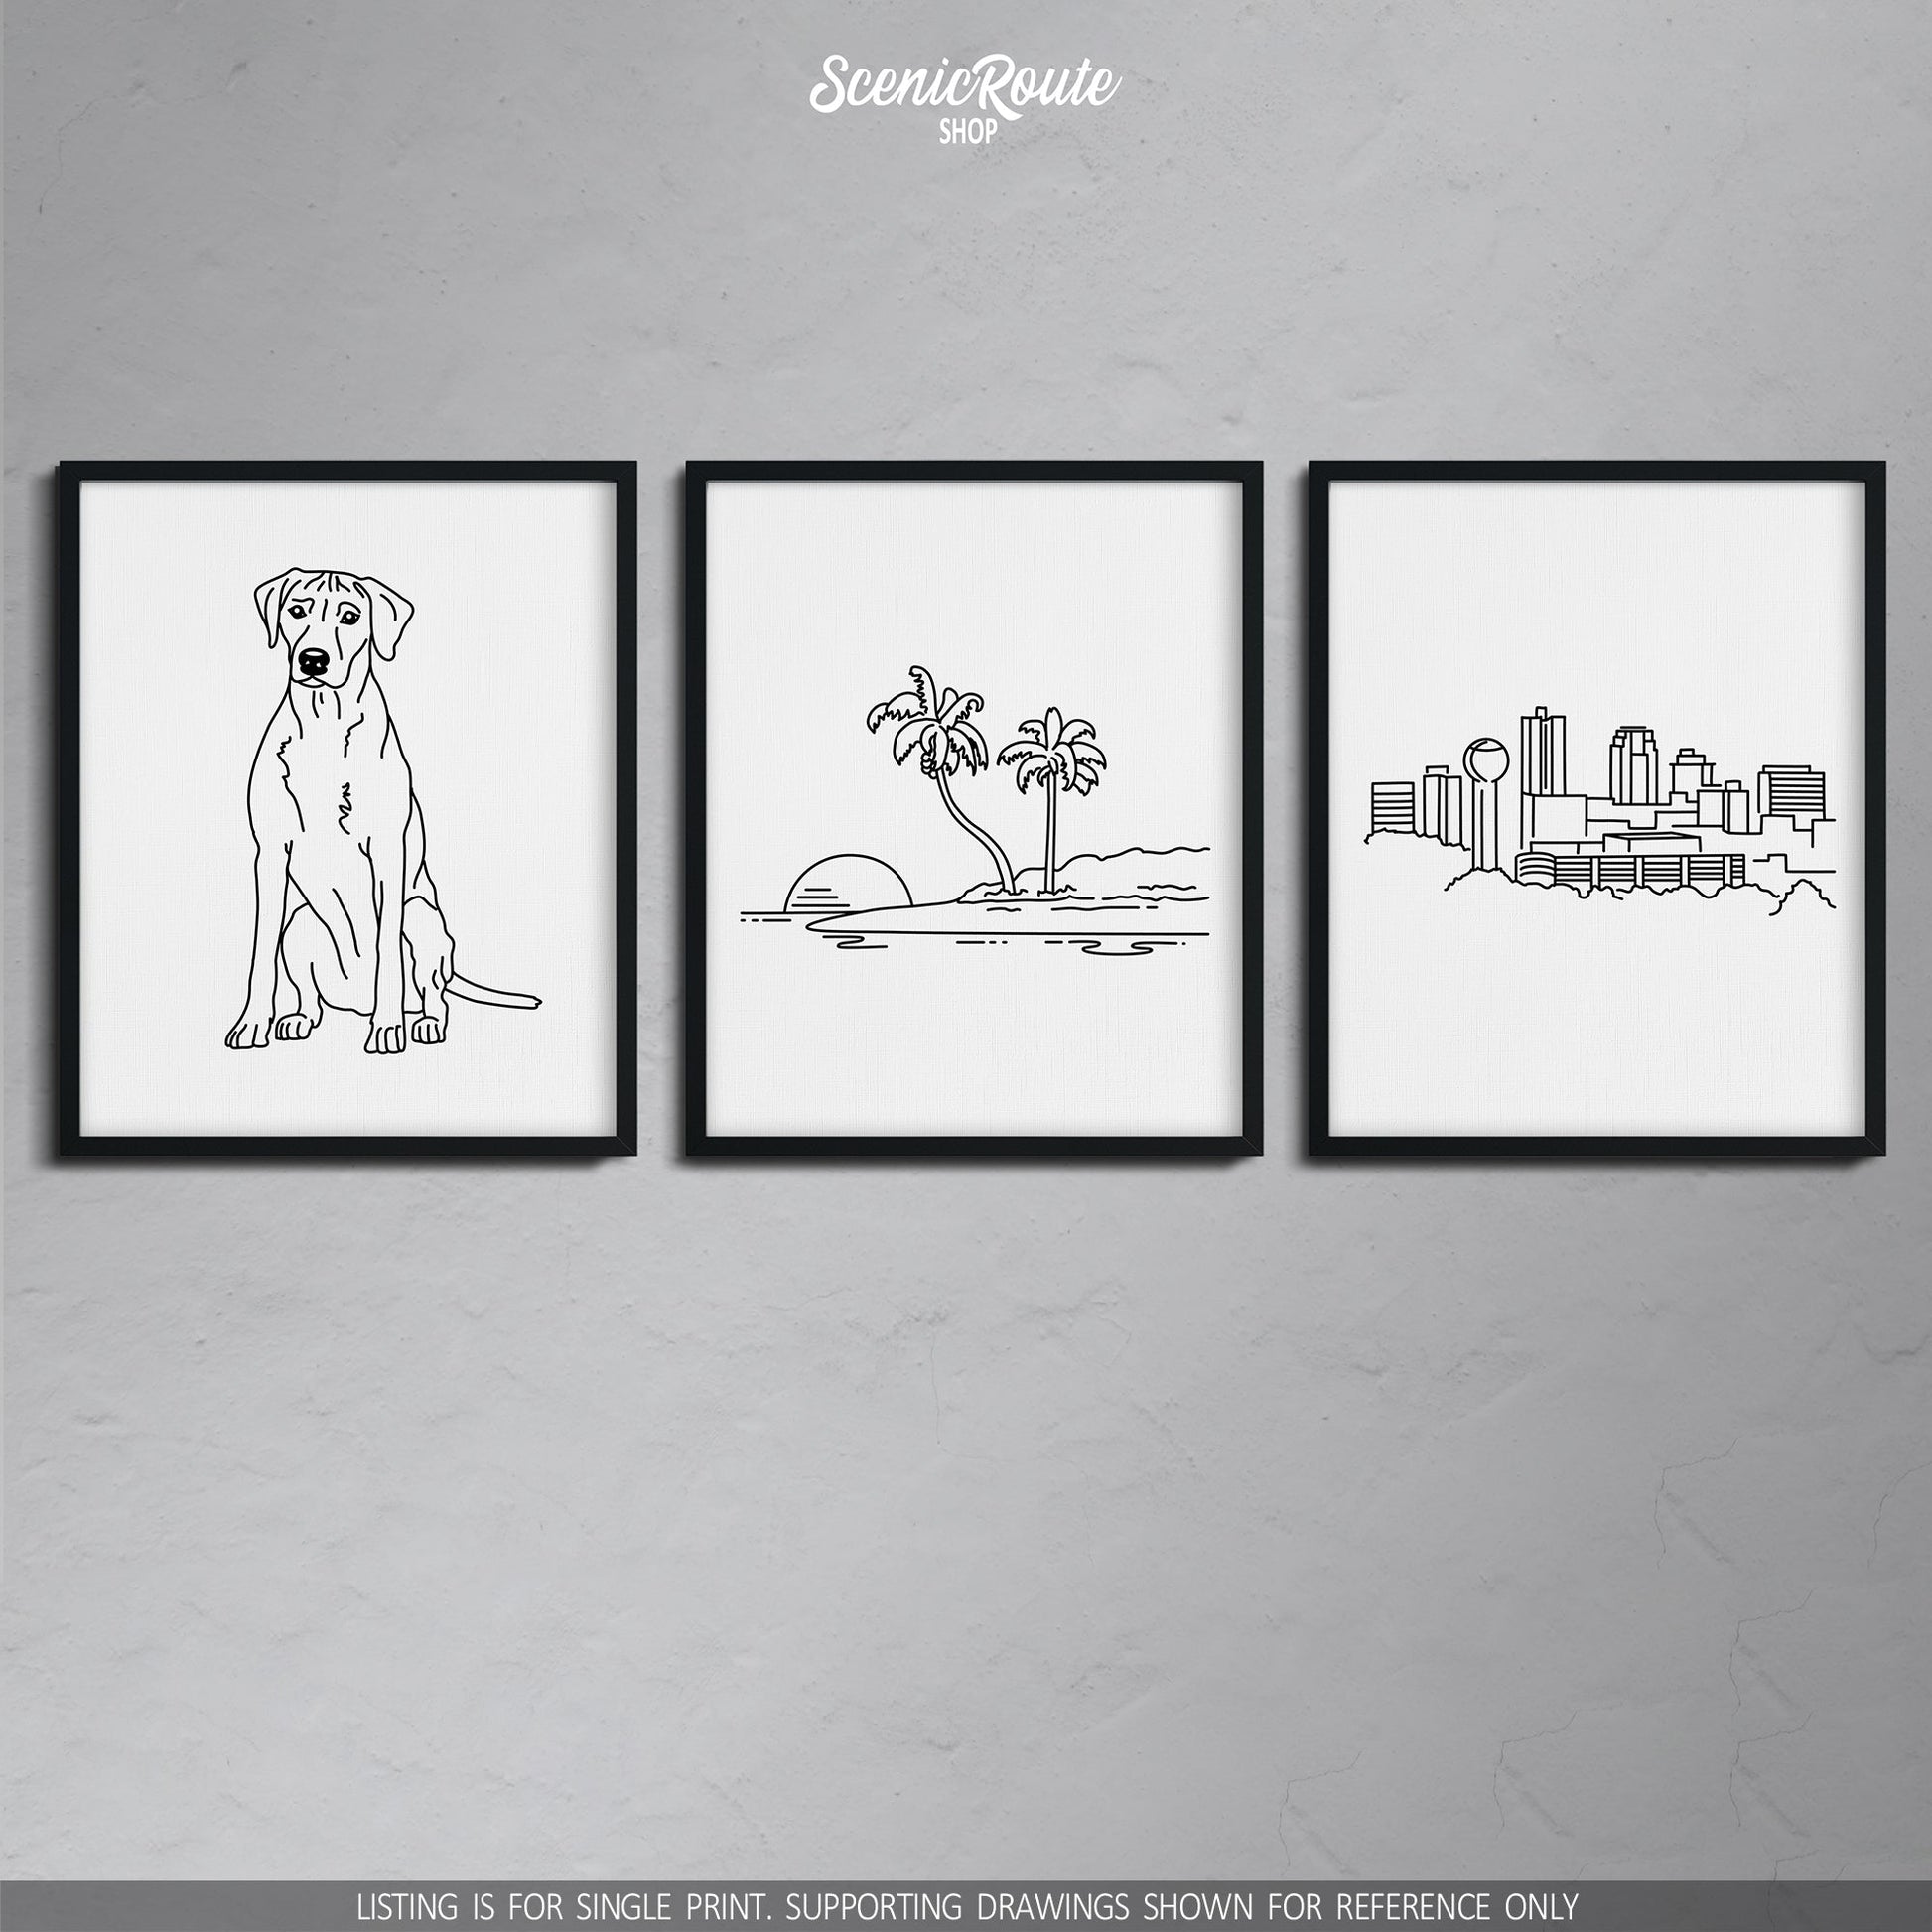 A group of three framed drawings on a gray wall. The line art drawings include a Rhodesian Ridgeback dog, an Island, and the Knoxville Skyline